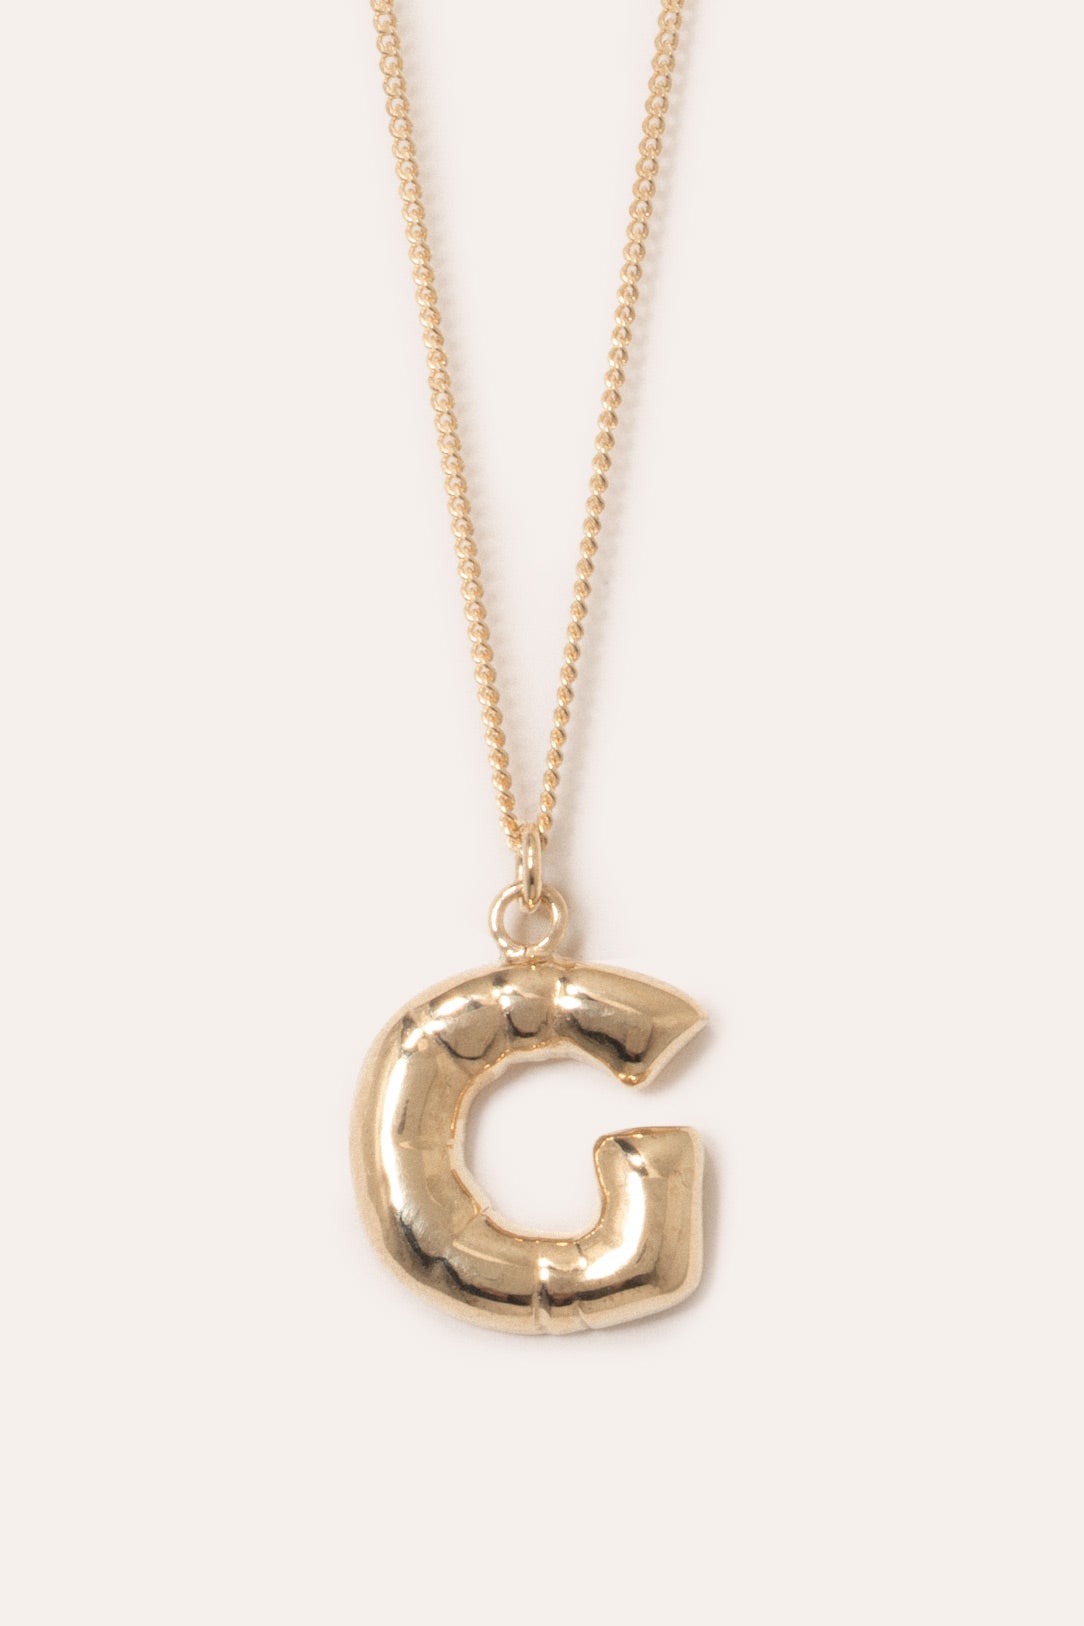 Diamond Initial Necklace and Pendant | Gold Presidents